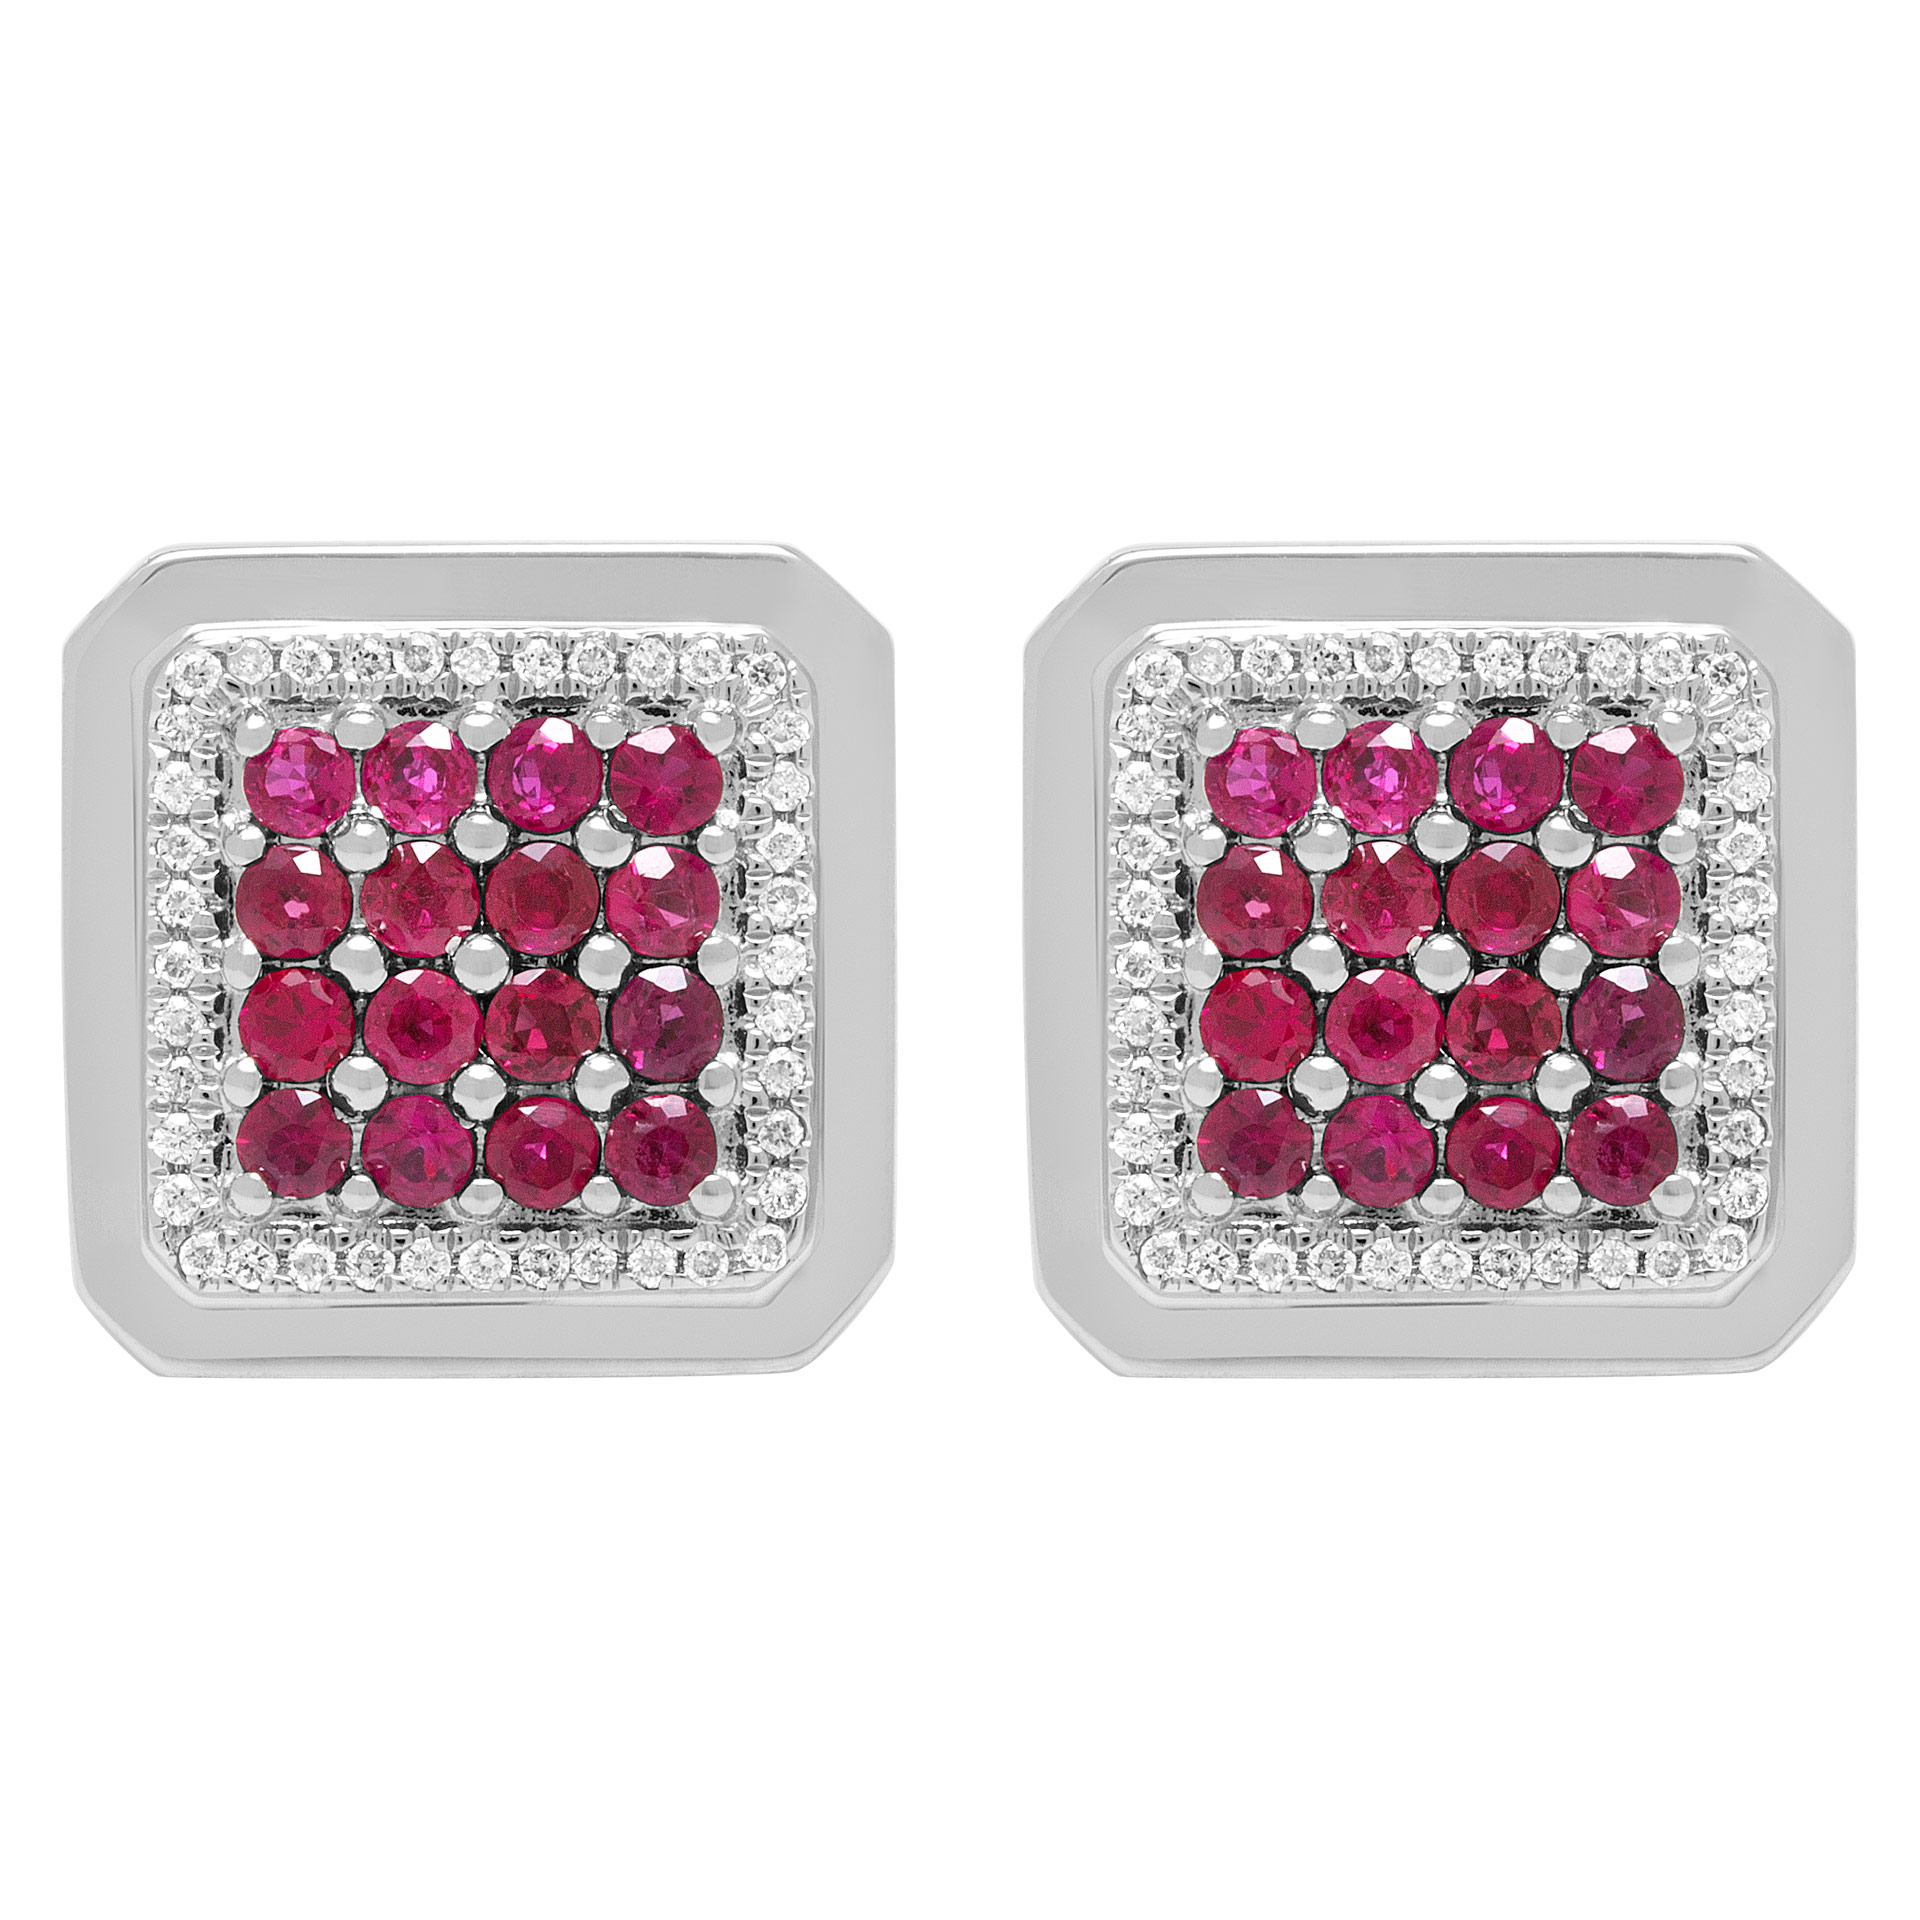 Cabochon rubies and round brilliant cut diamonds square cufflinks in 18k white gold. Cabochon ruby total approx. weight: 3.20 carats.